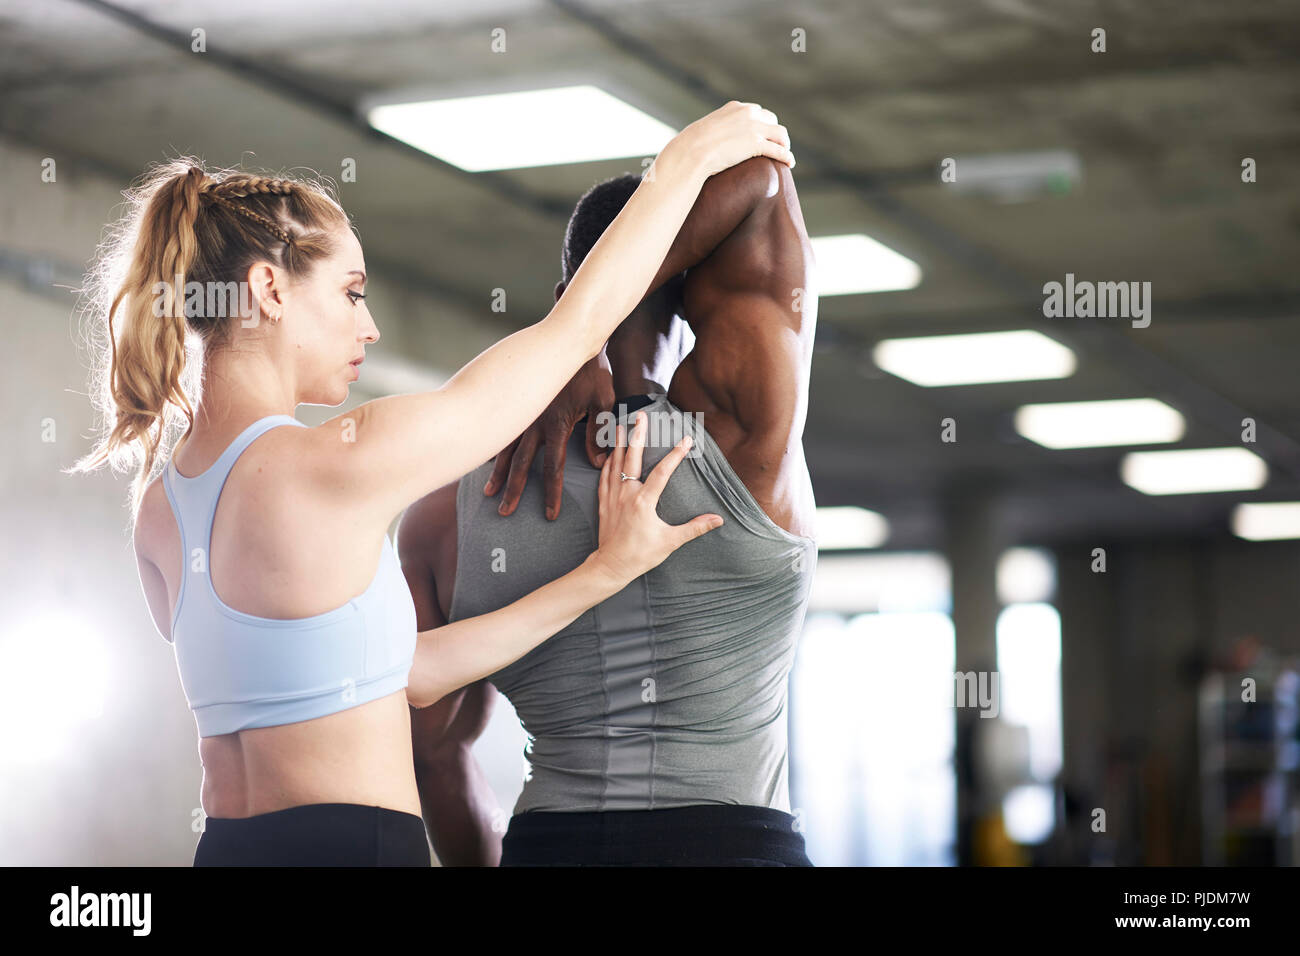 Trainer helping man with stretching exercise in gym Stock Photo